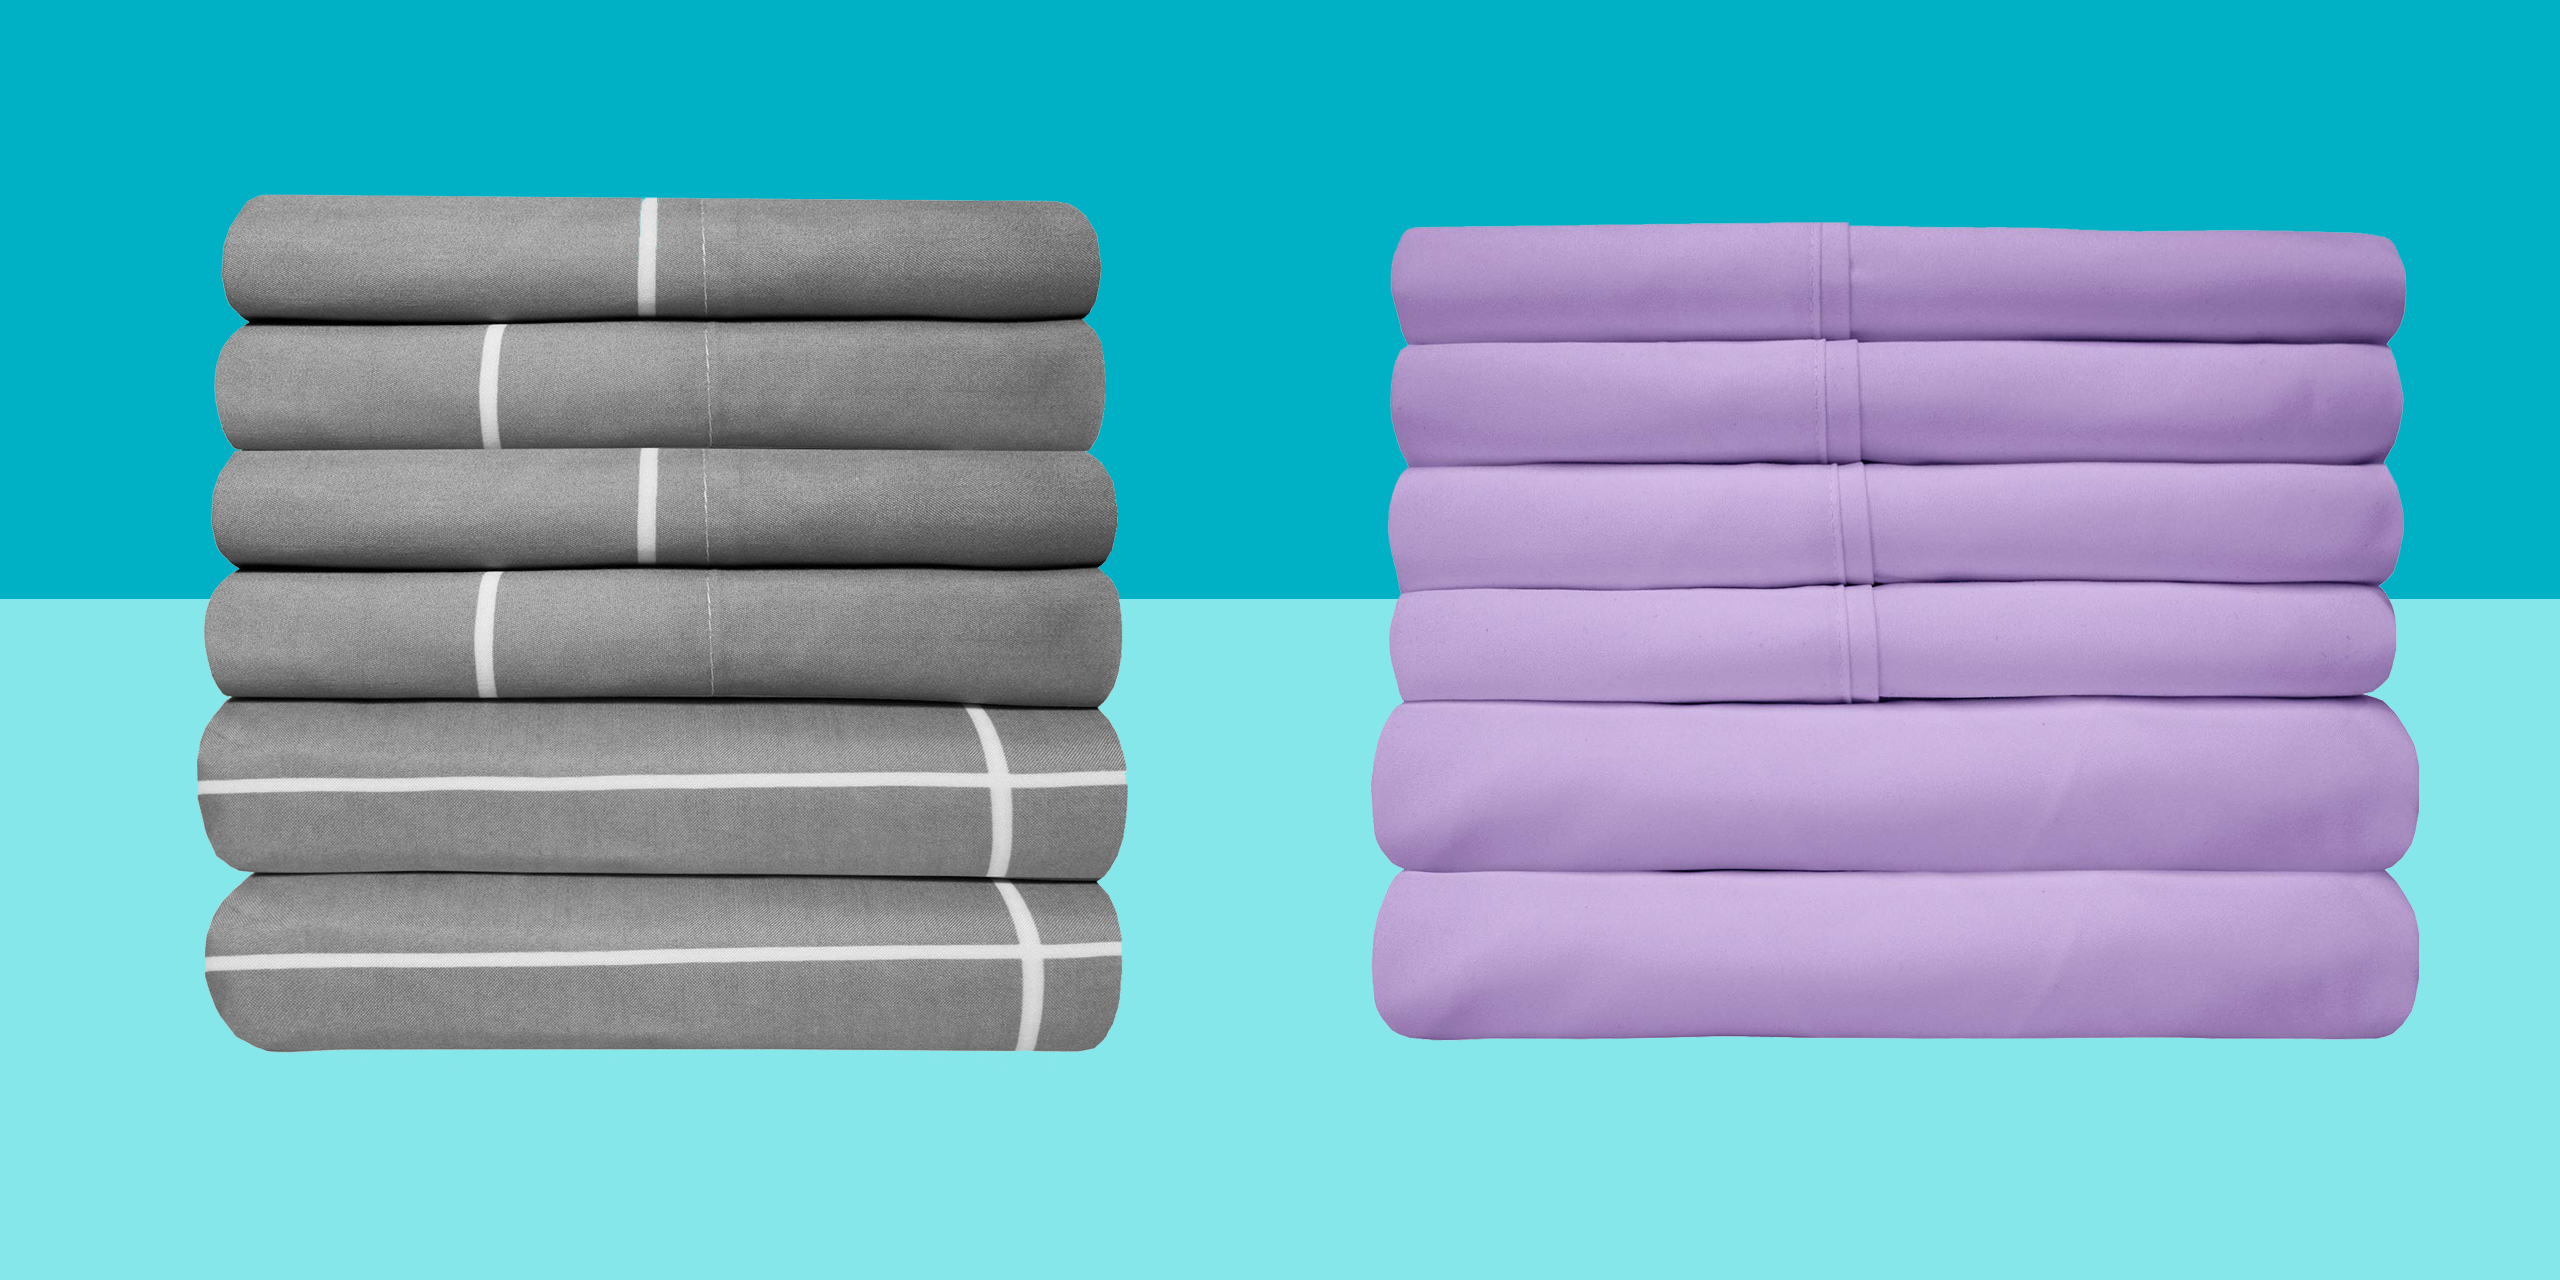 These Cooling Sheets Have 11,000+ 5-Star Reviews and Are $20 on Amazon